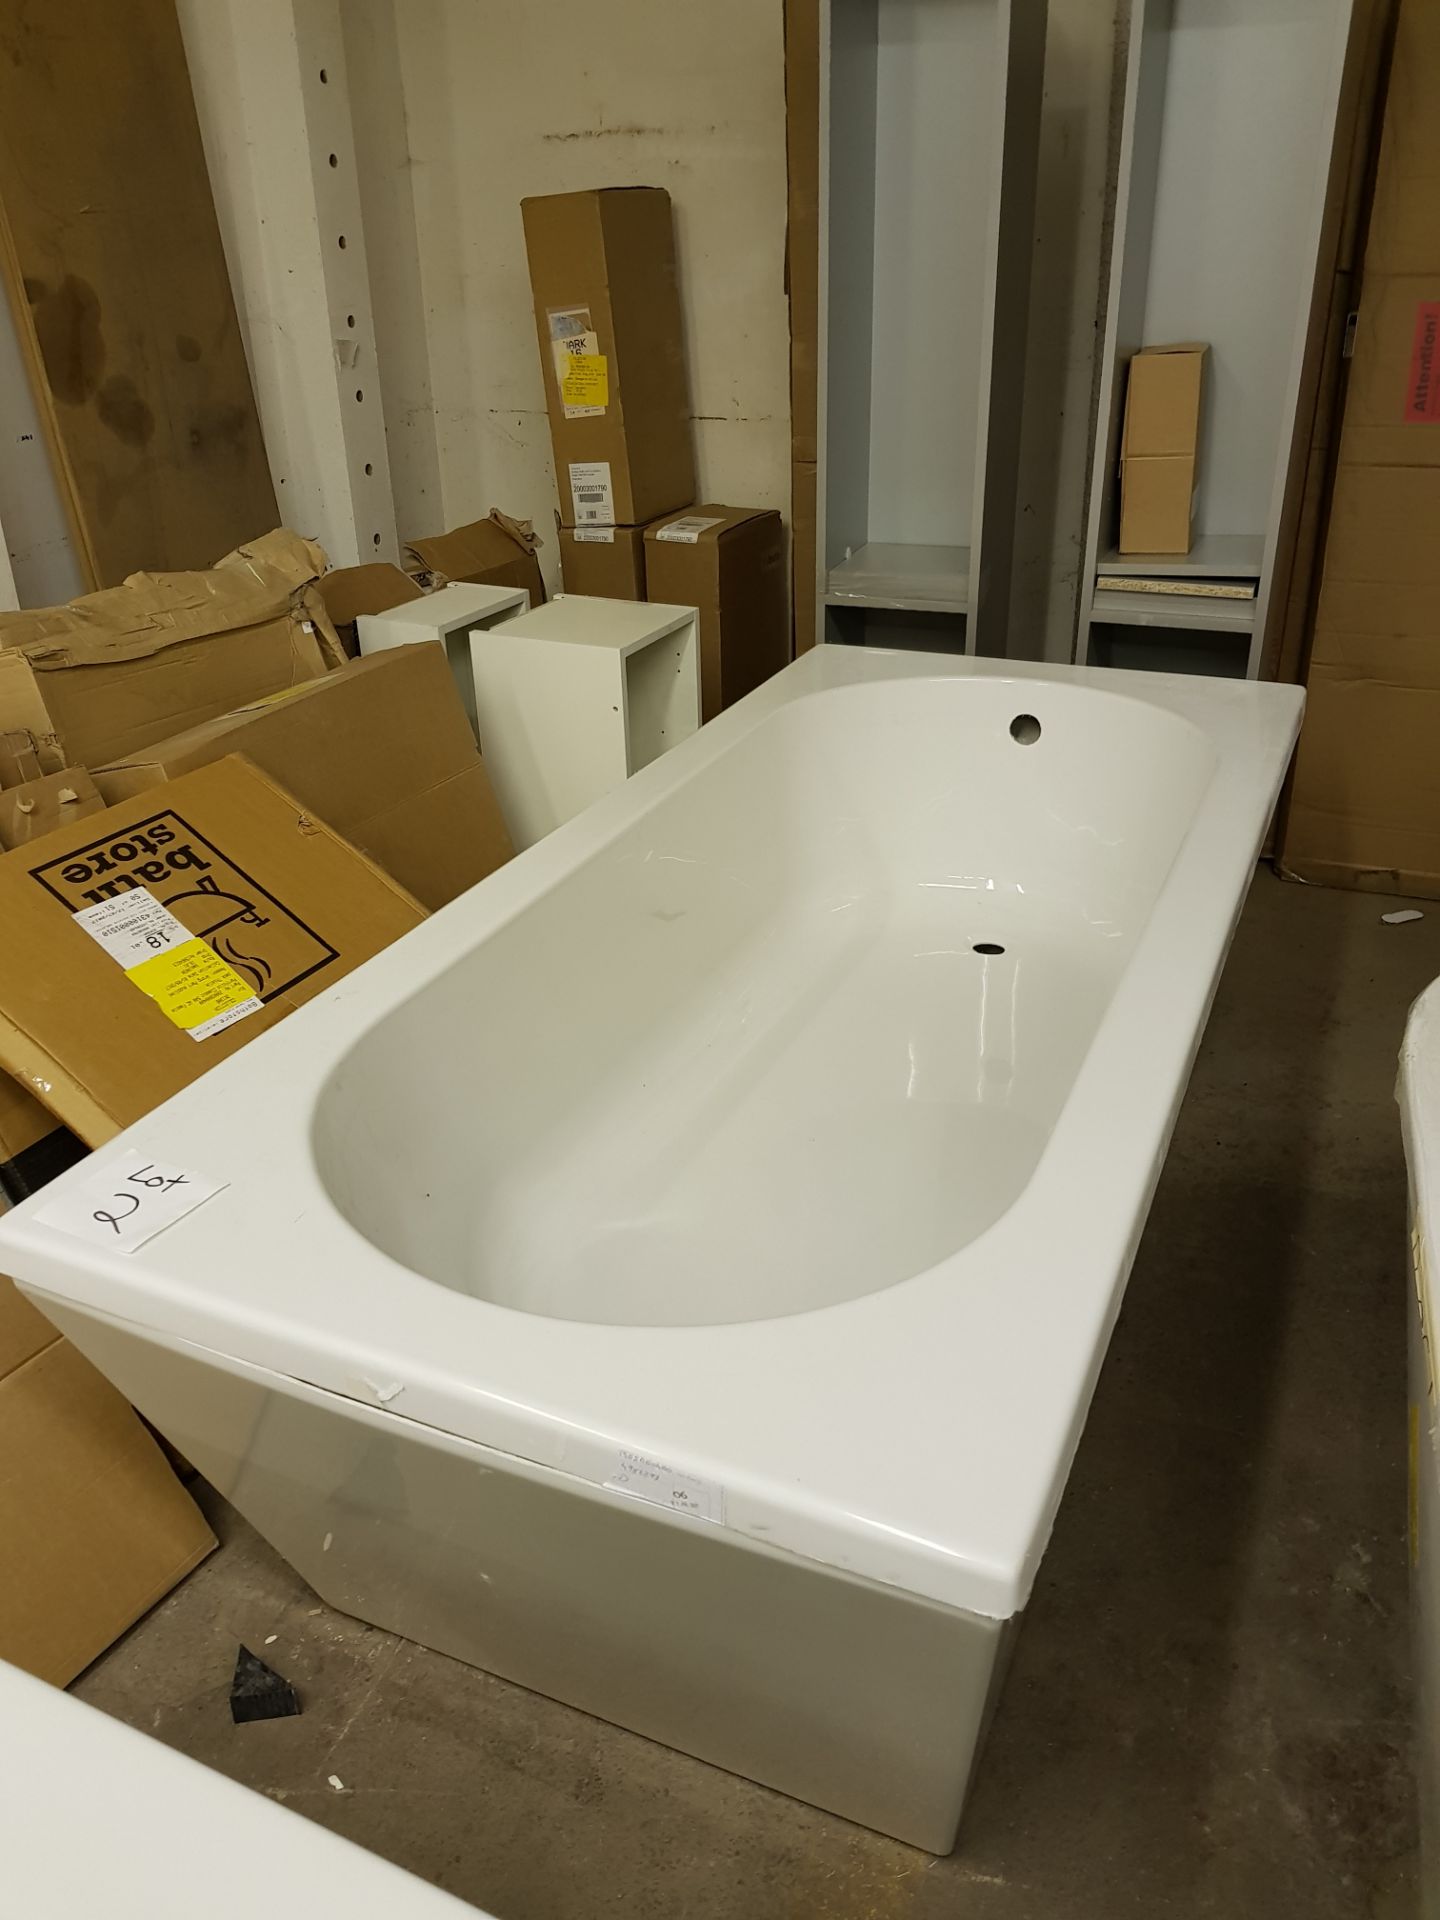 1800x800 single ended round bath with surround. - Image 2 of 2